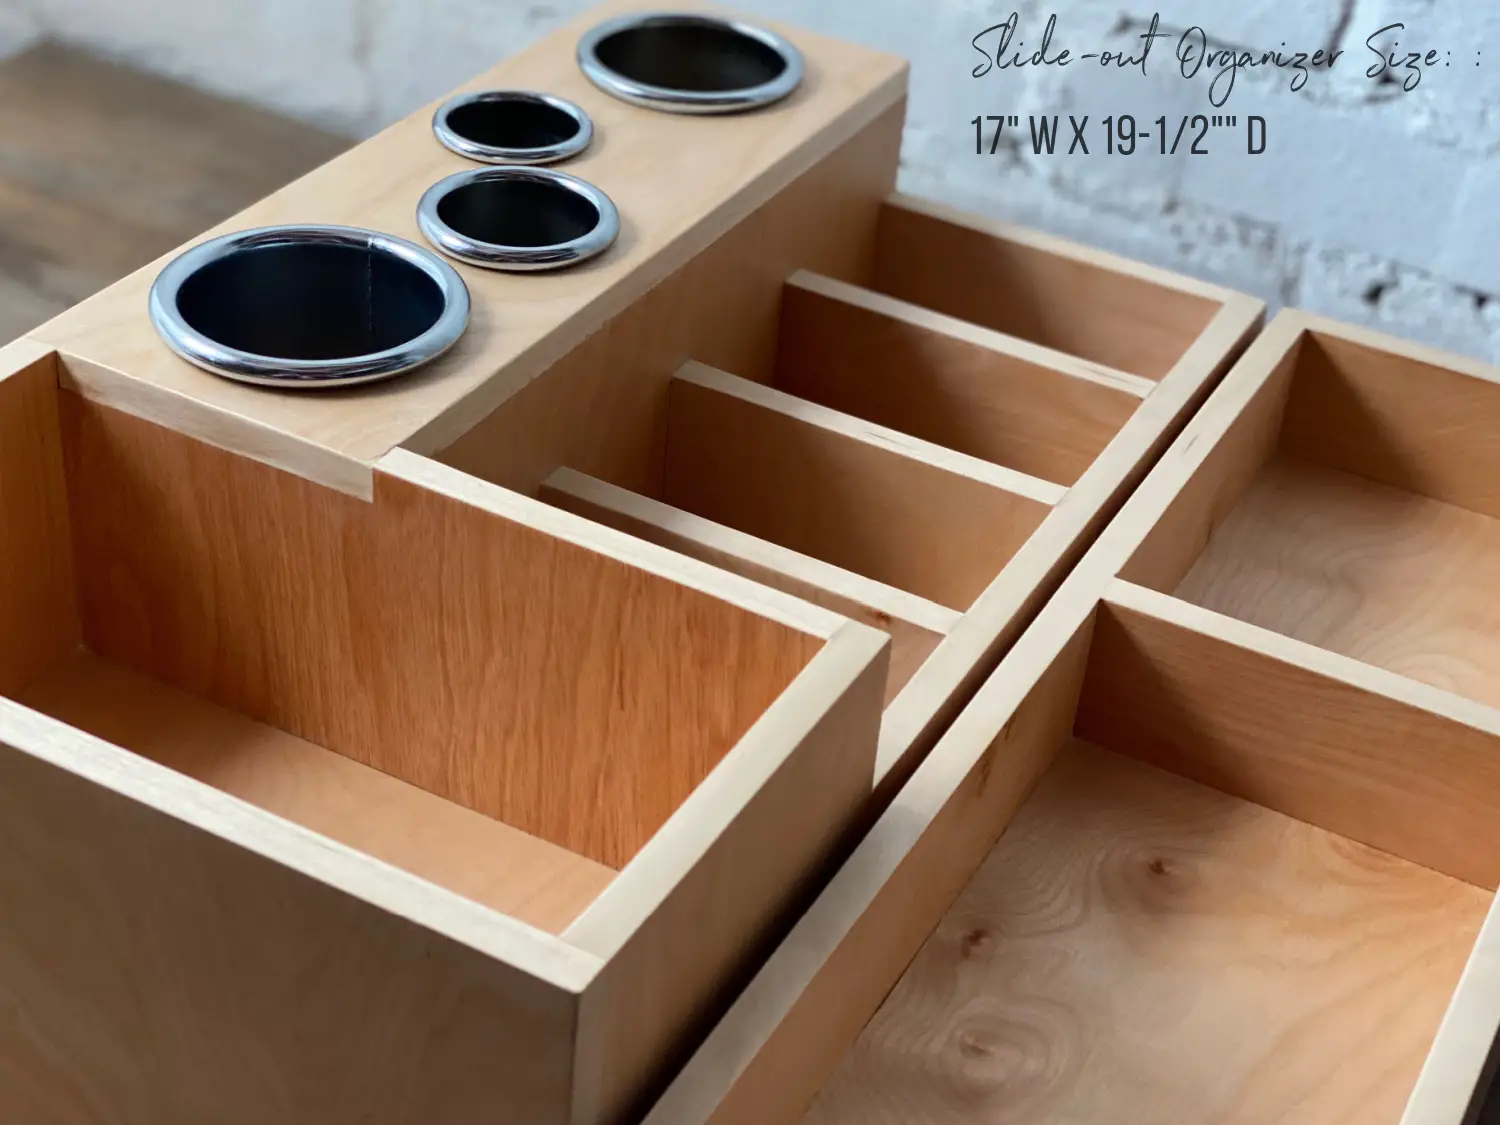 TEMPLATE] Custom Slide-out Hair Tool Organizer – Simplicity in the South